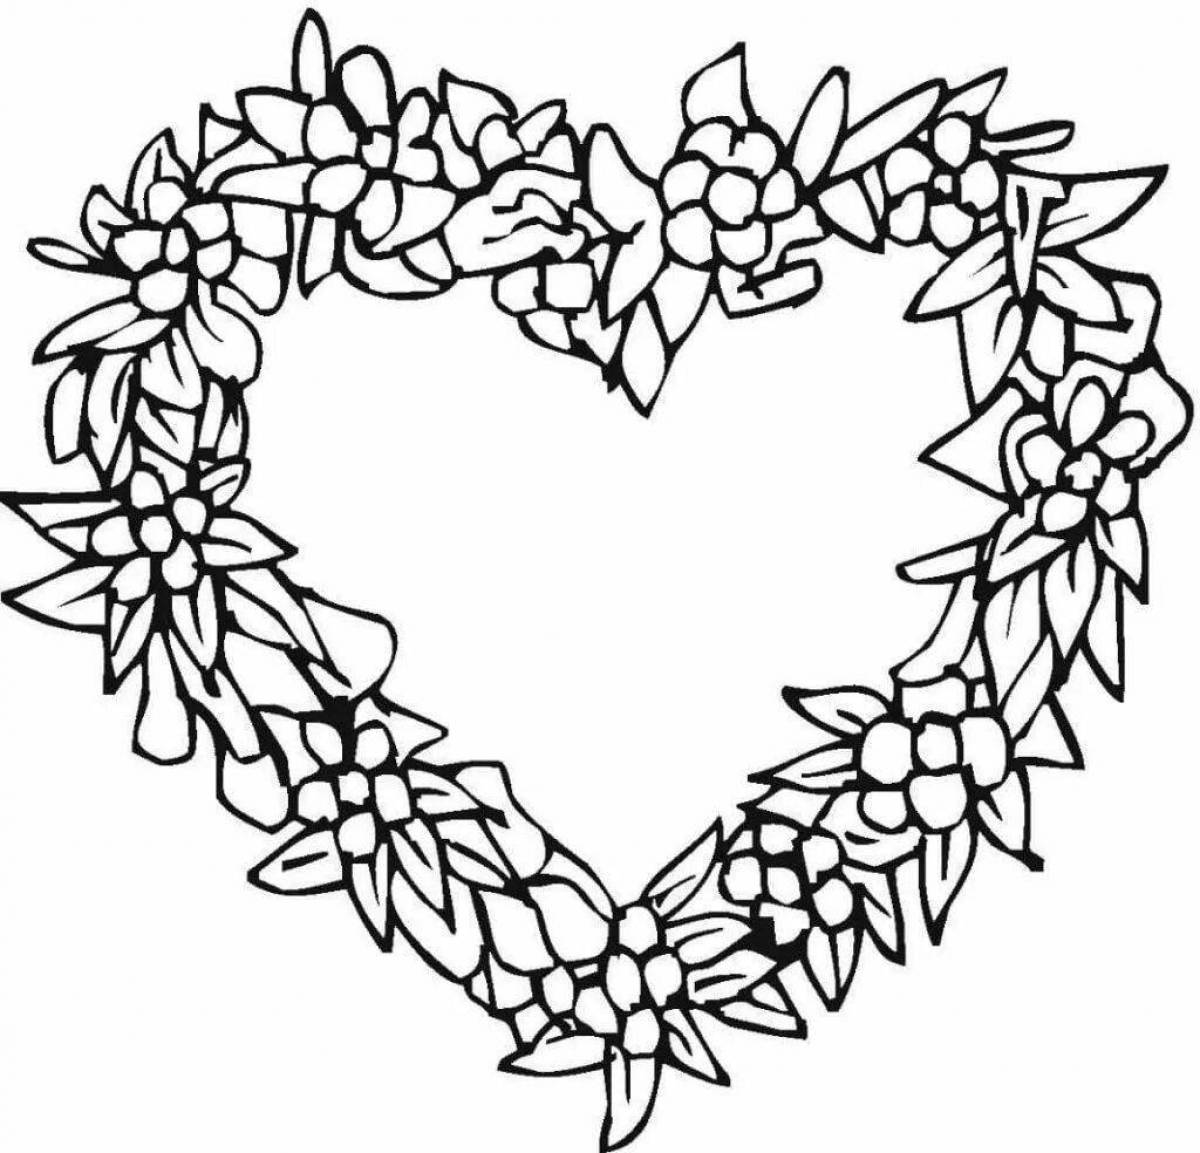 Coloring page nice heart and flower